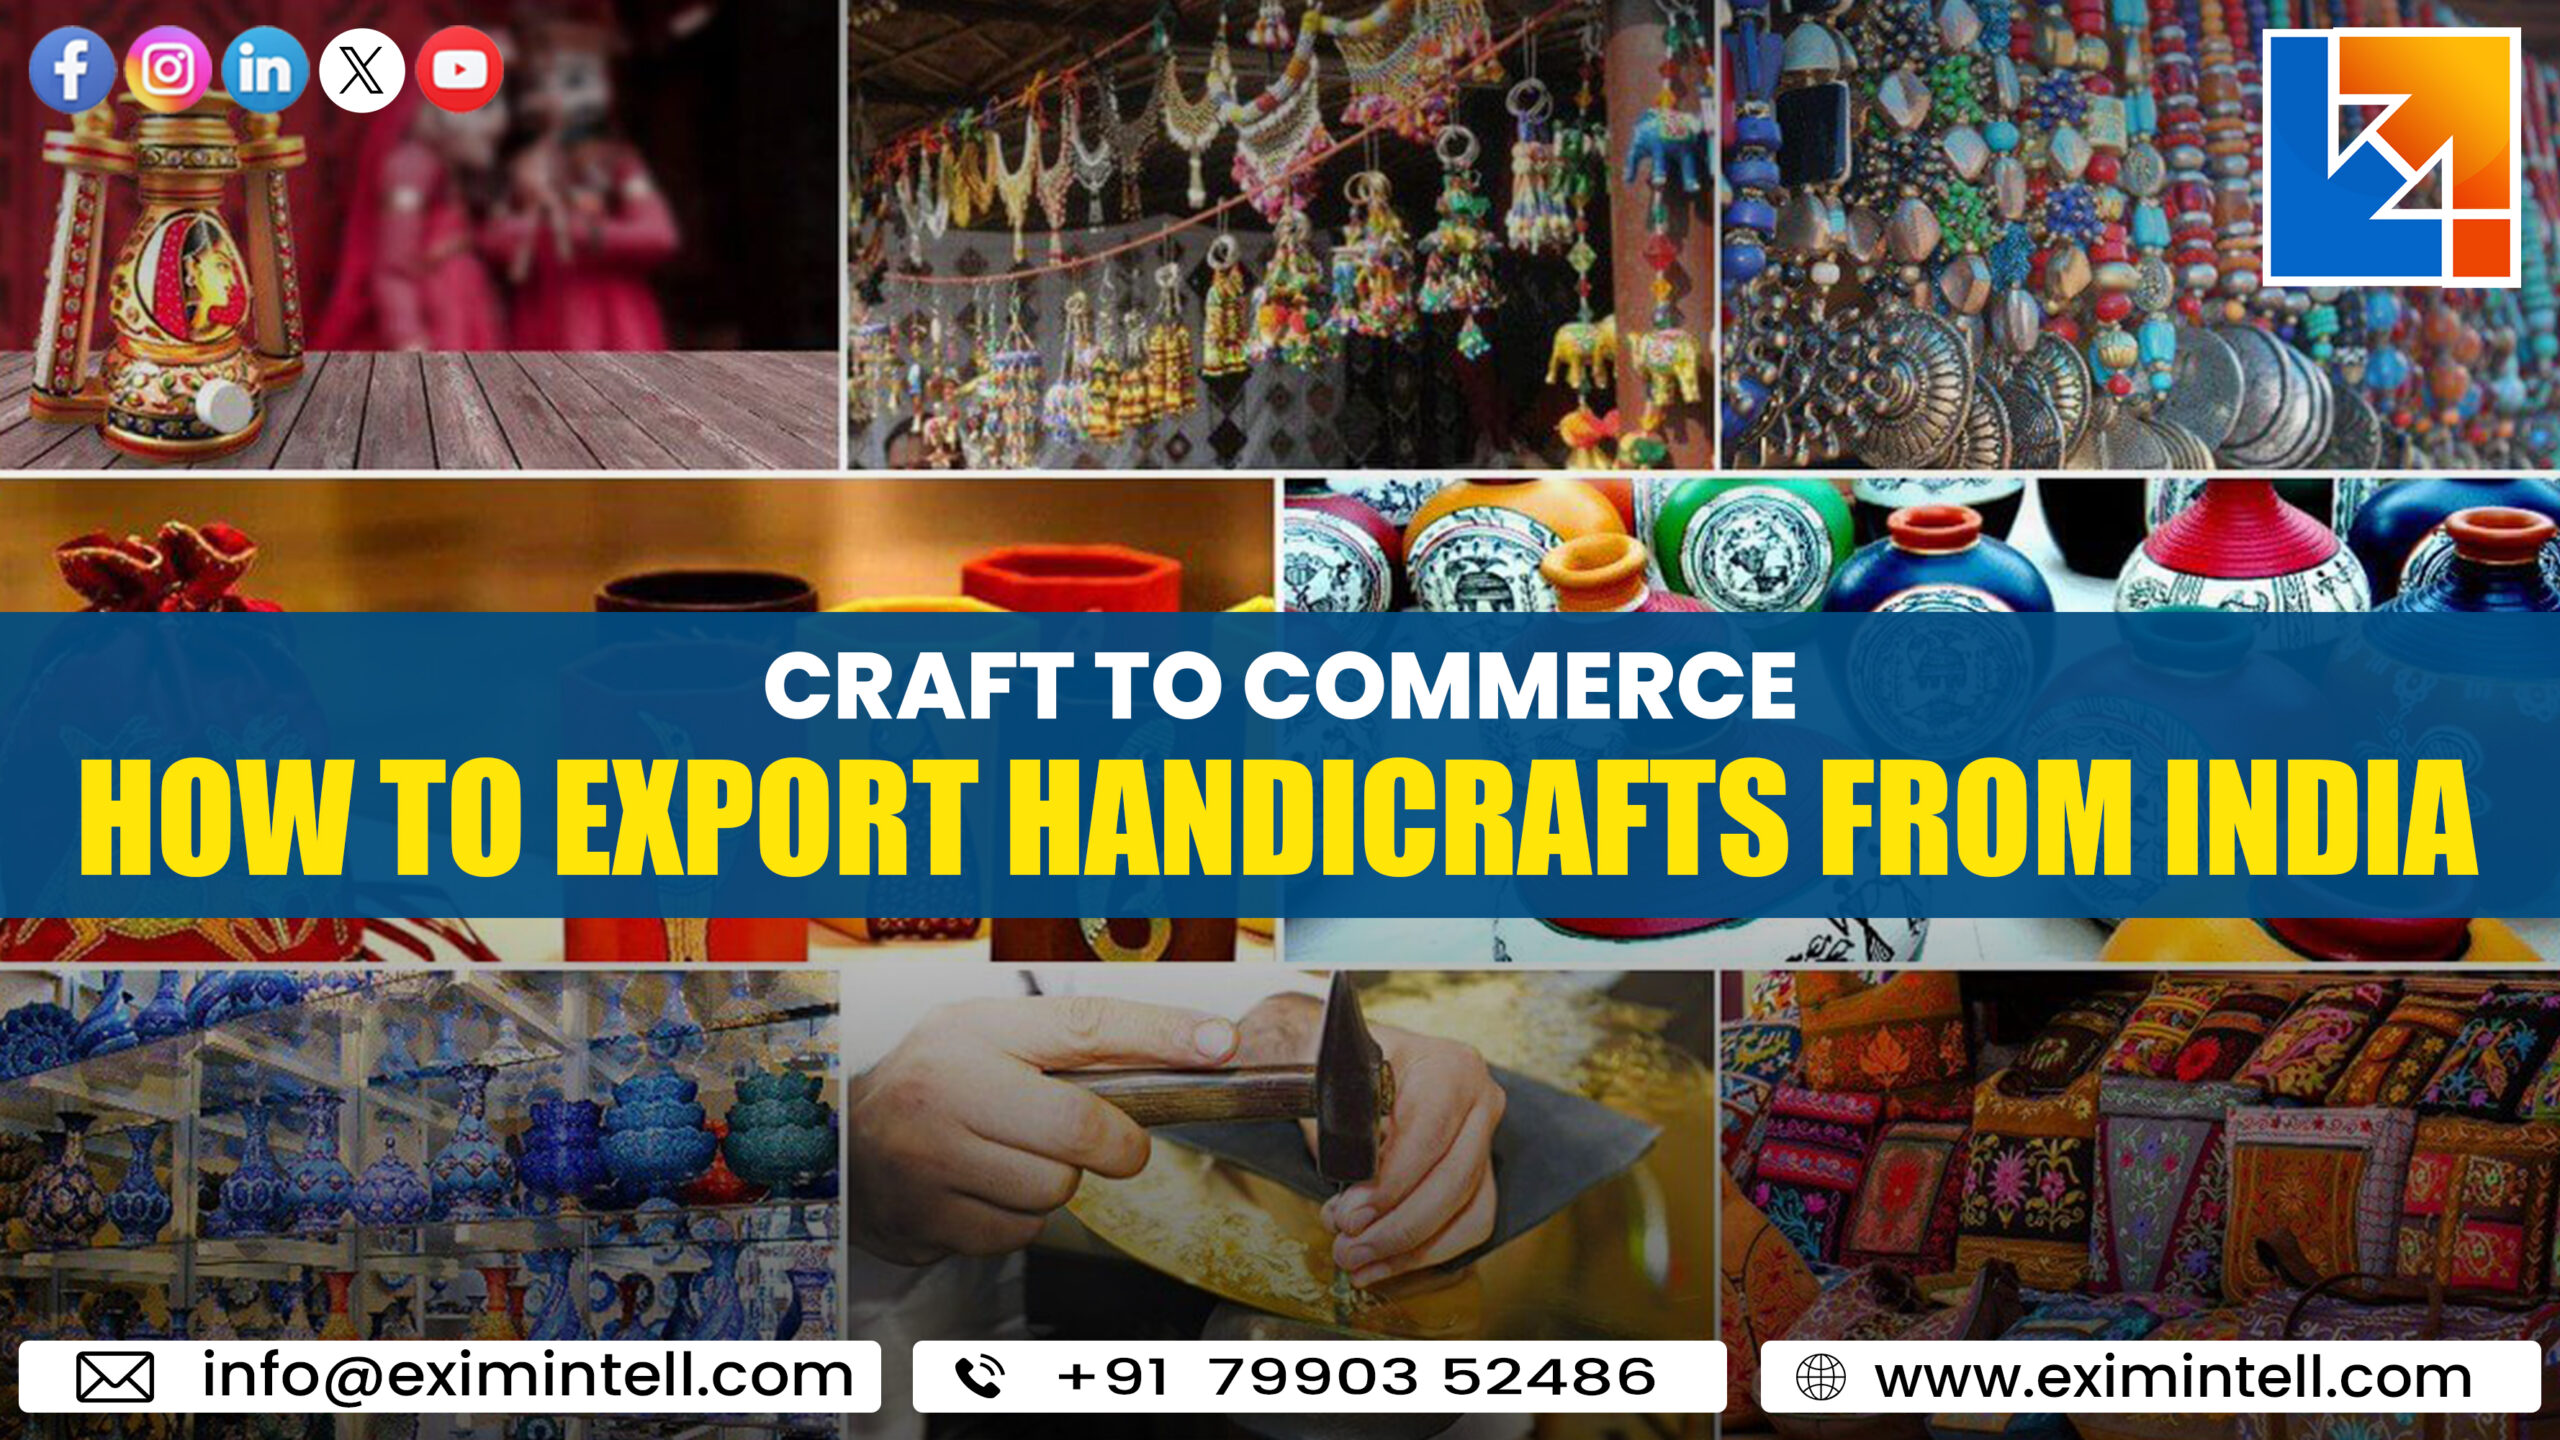 Craft to Commerce: How to Export Handicrafts from India